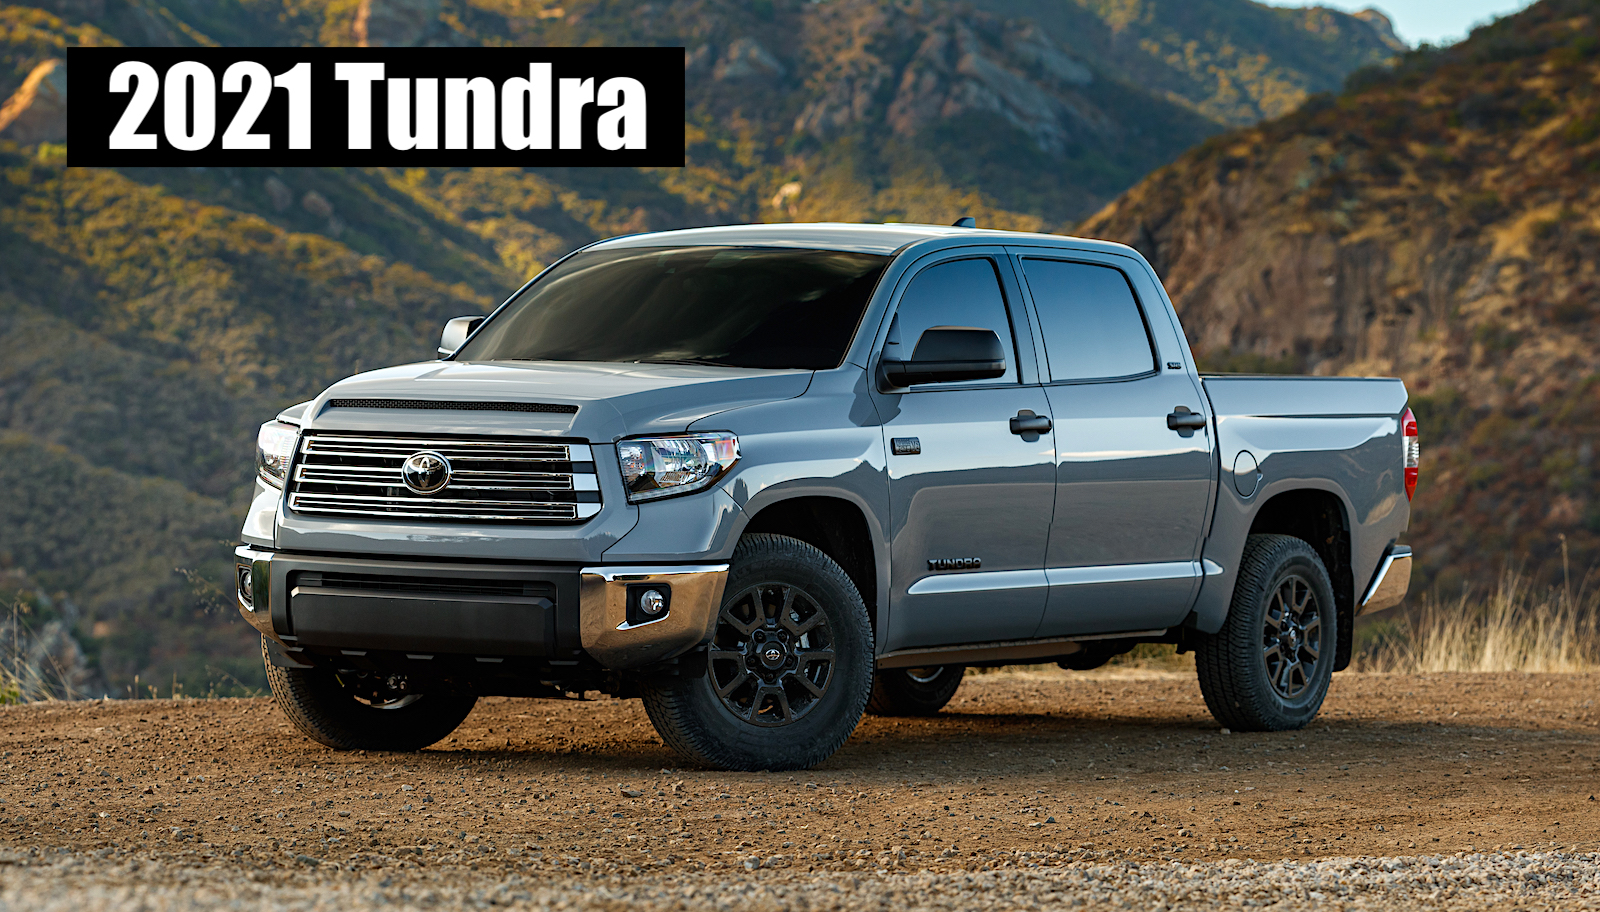 2021 Toyota Tundra Full Pricing Guide Is Here: New Options ...